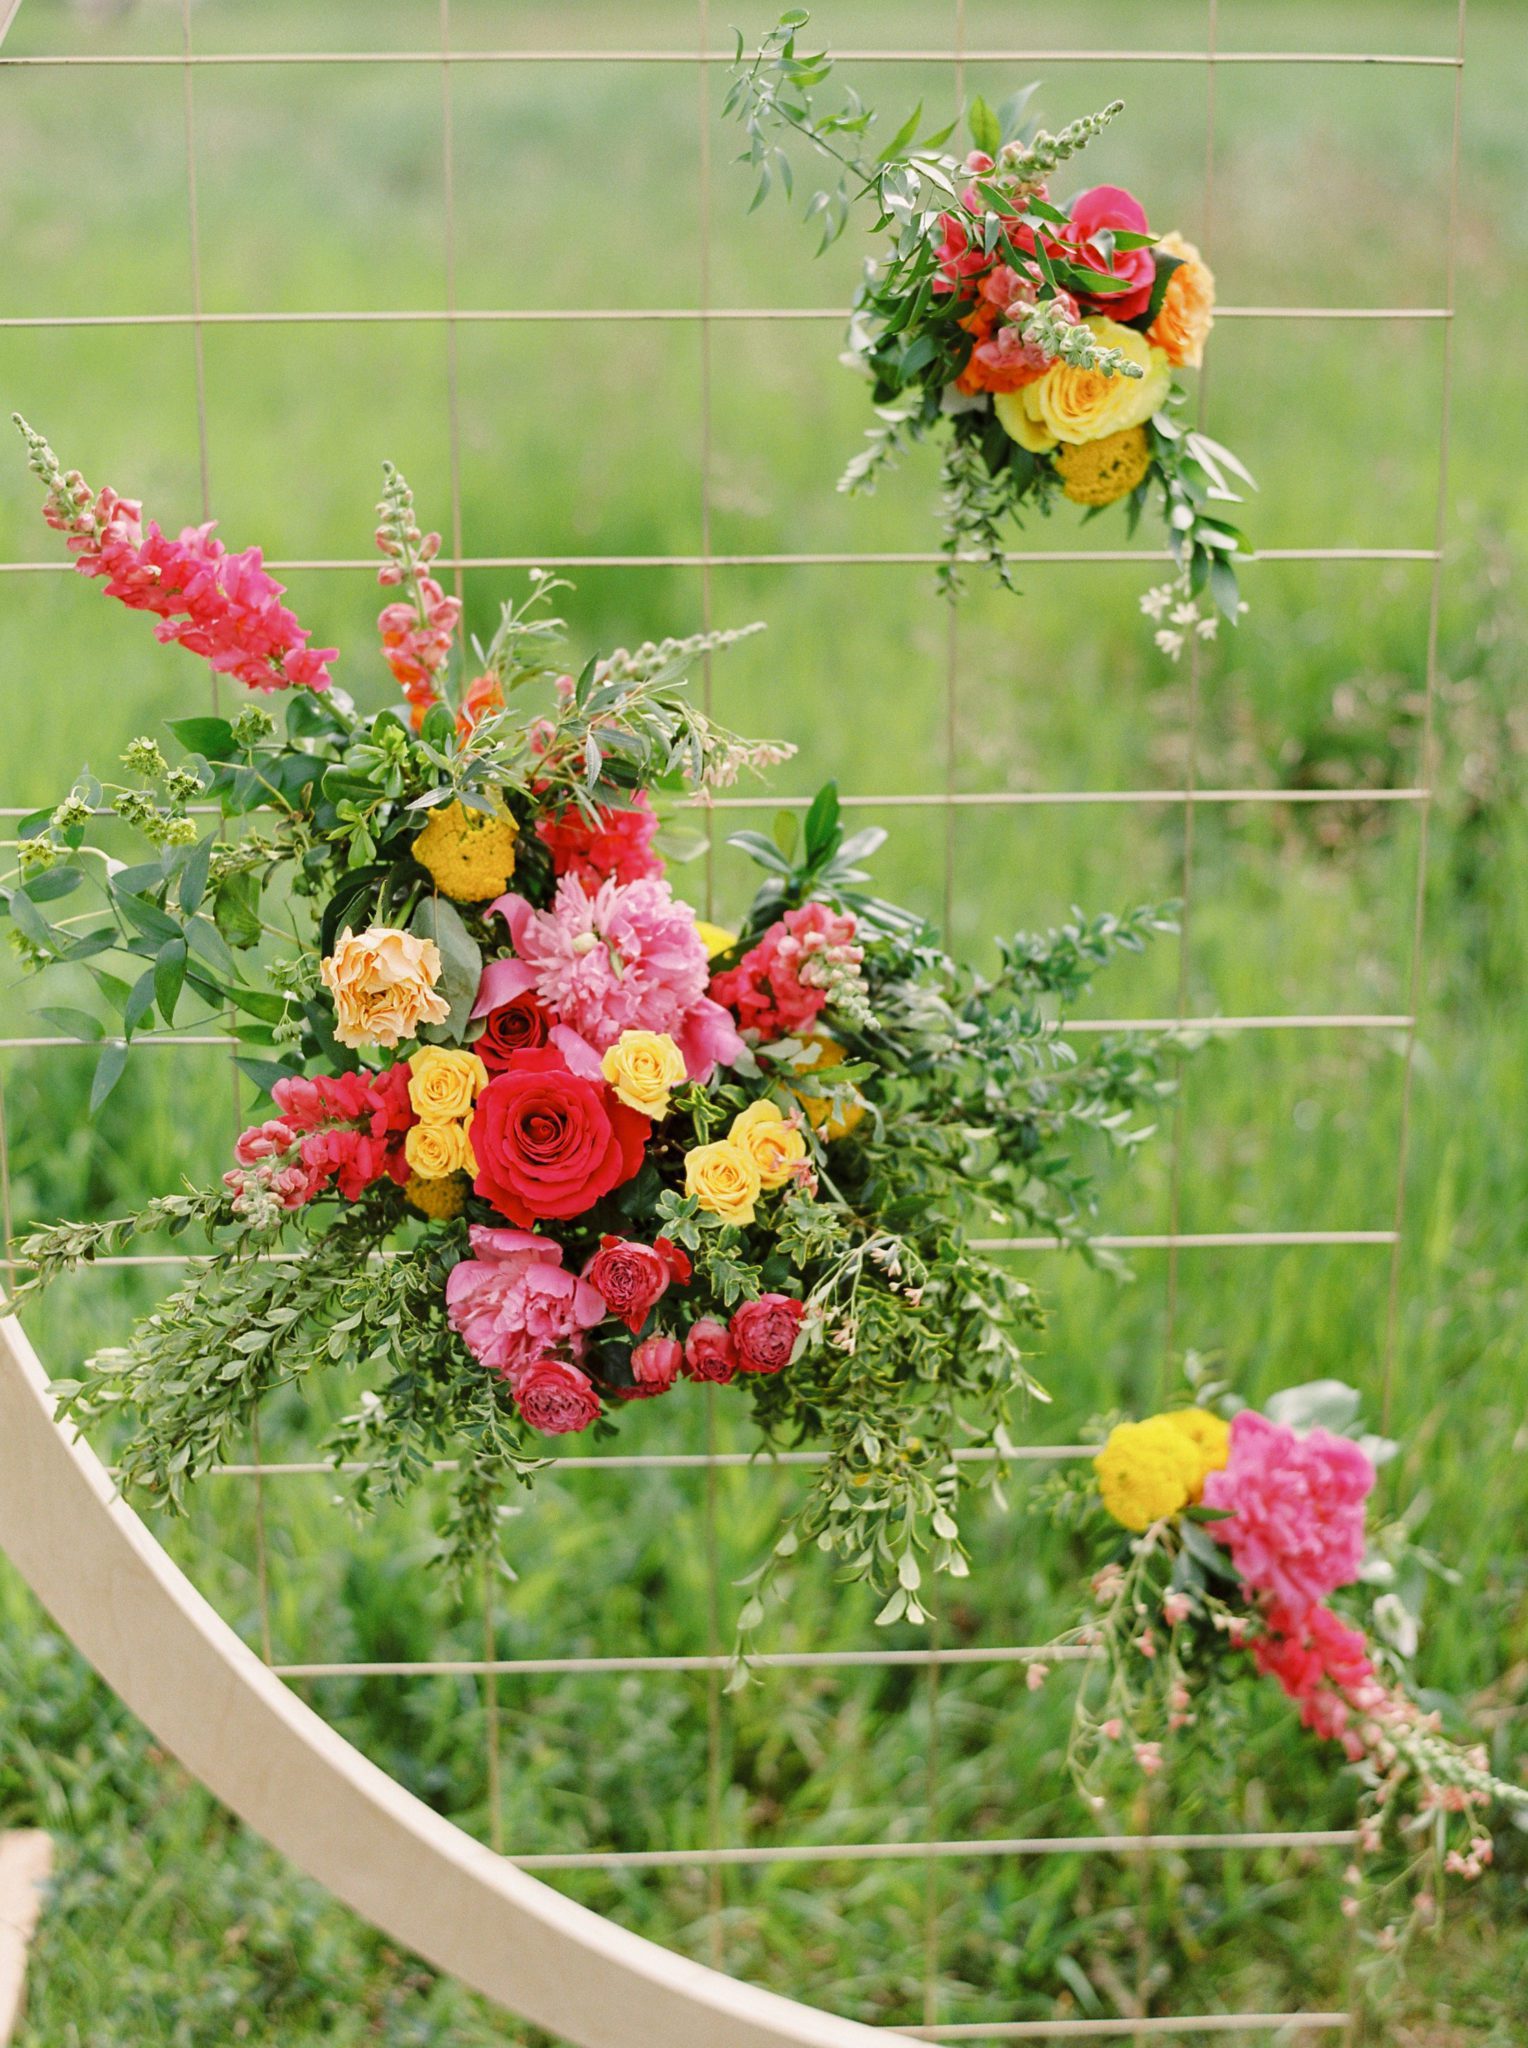 Farmhouse Chic: A Vibrant Wedding Inspiration Shoot at the Gathered | Brontë Bride Blog - Modern Wedding Arch with Bright Colourful Flowers